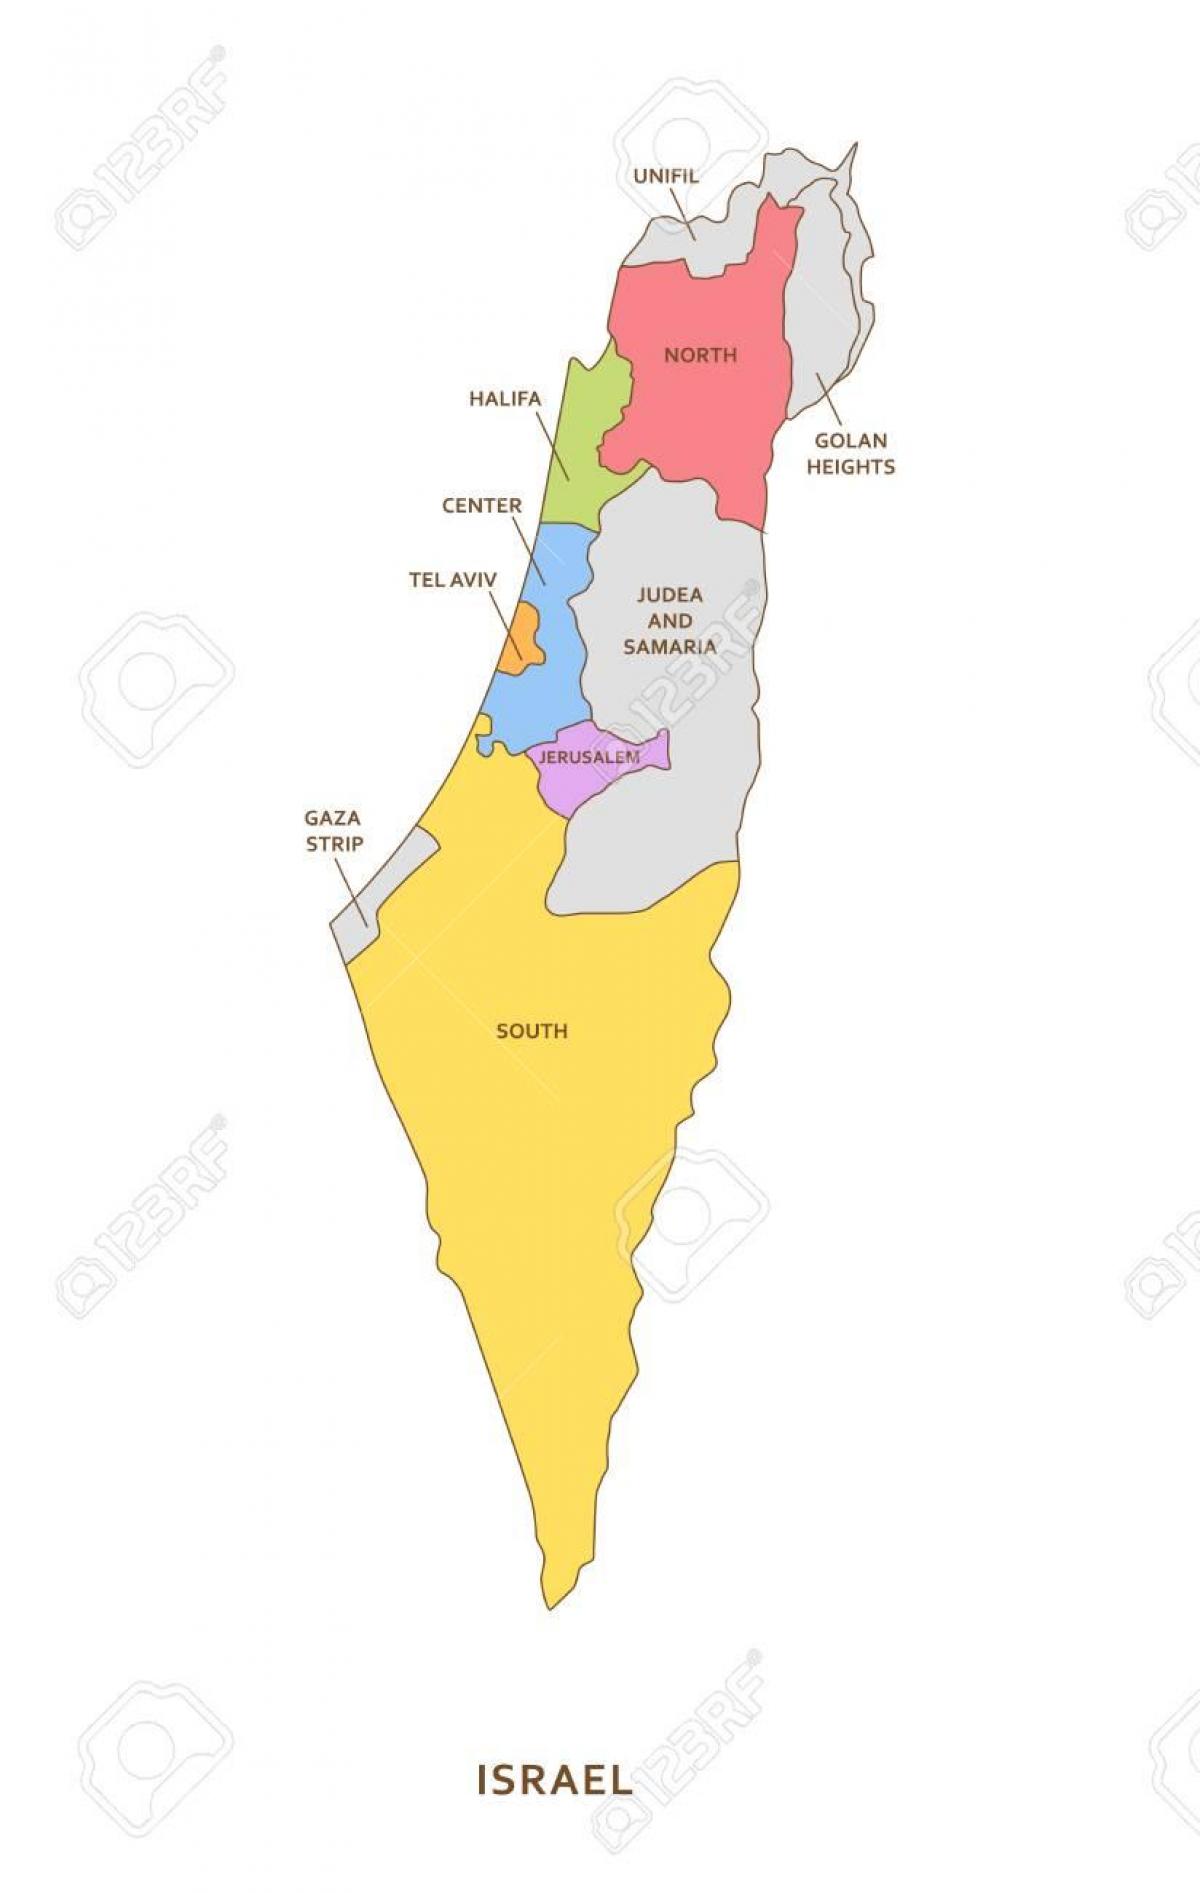 Israel areas map